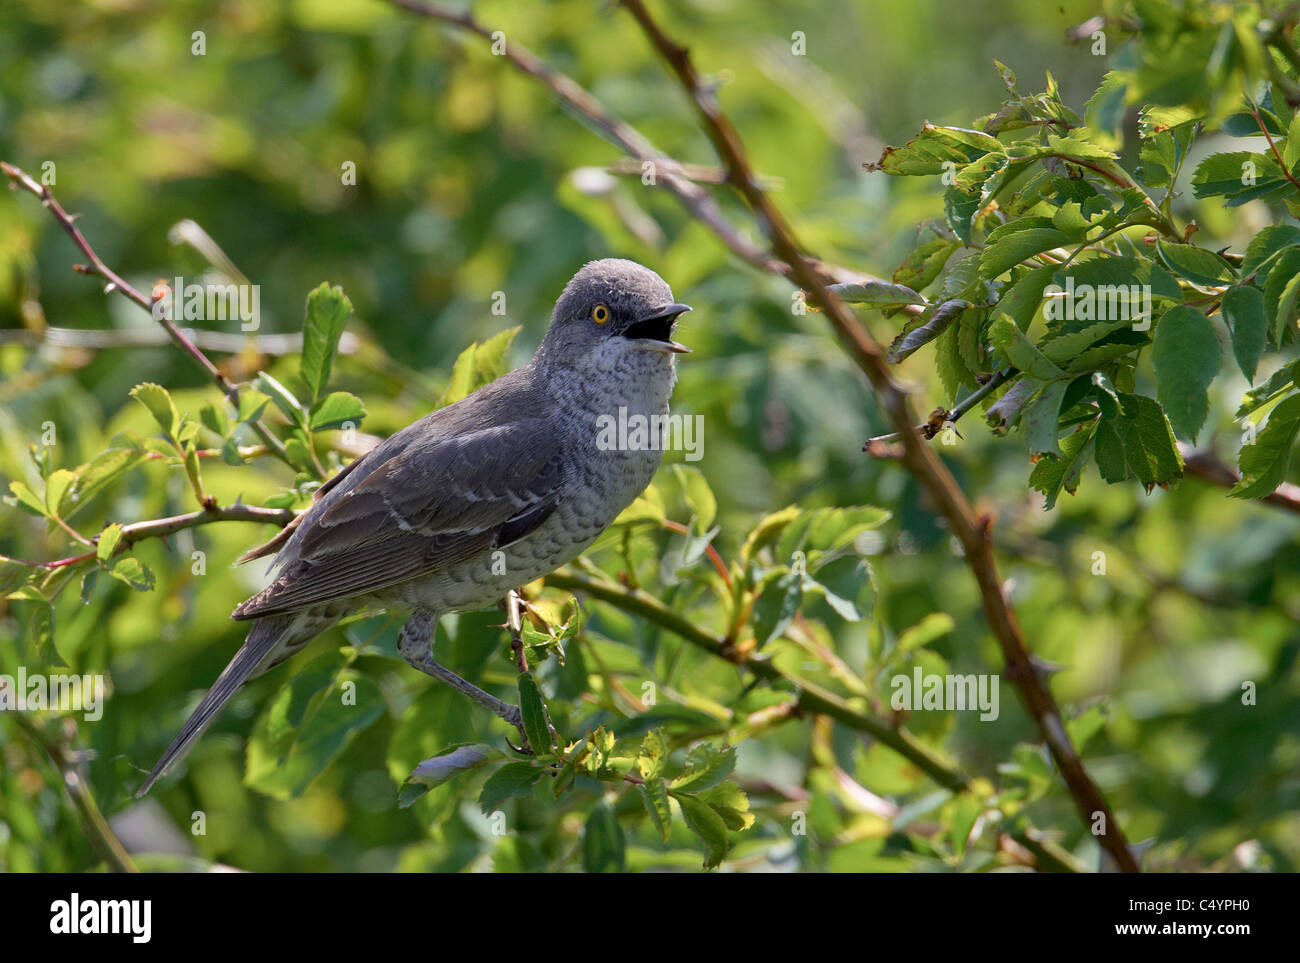 Barred Warbler (Sylvia nisoria). Adult male perched on a rose twig while singing. Stock Photo